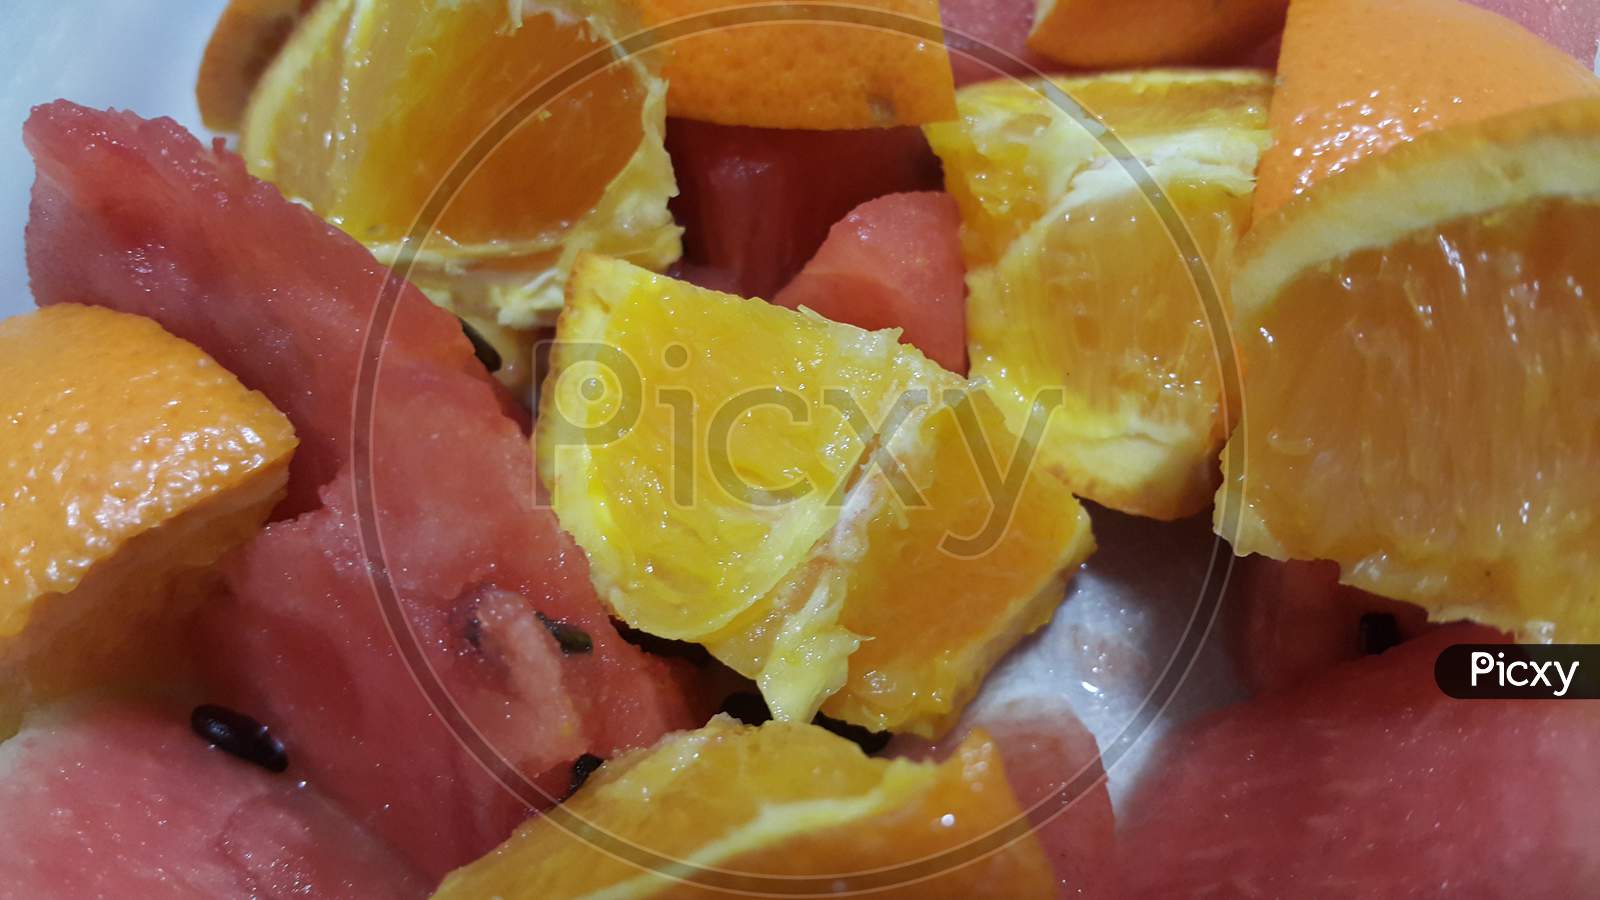 Closeup View Of Mixed Fruits Slices Of Citrus Oranges And Sweet Red Watermelon